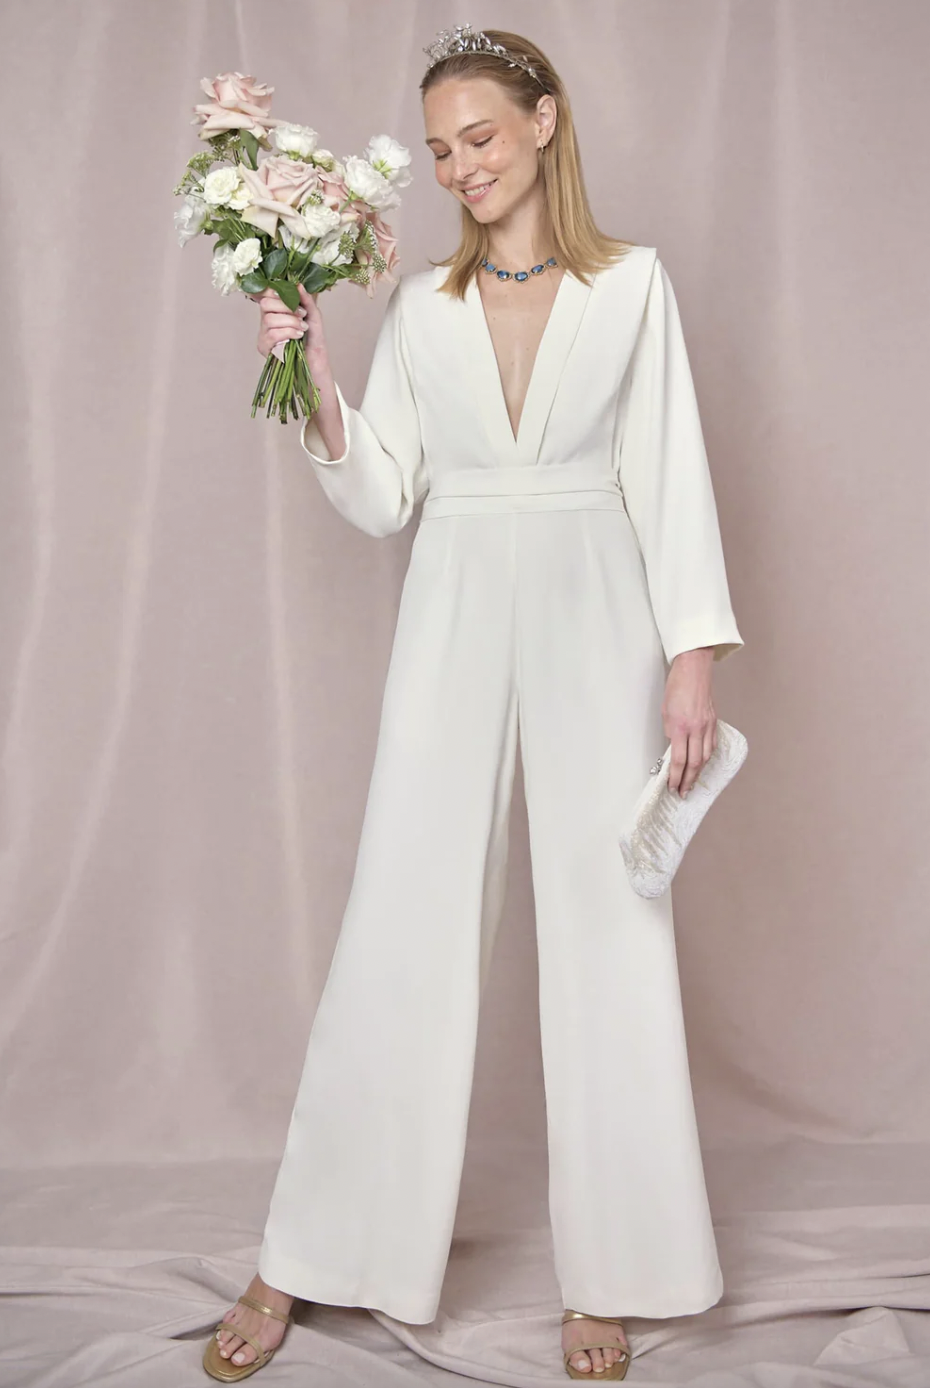 Brides Who Rocked Their Look In Wedding Jumpsuits